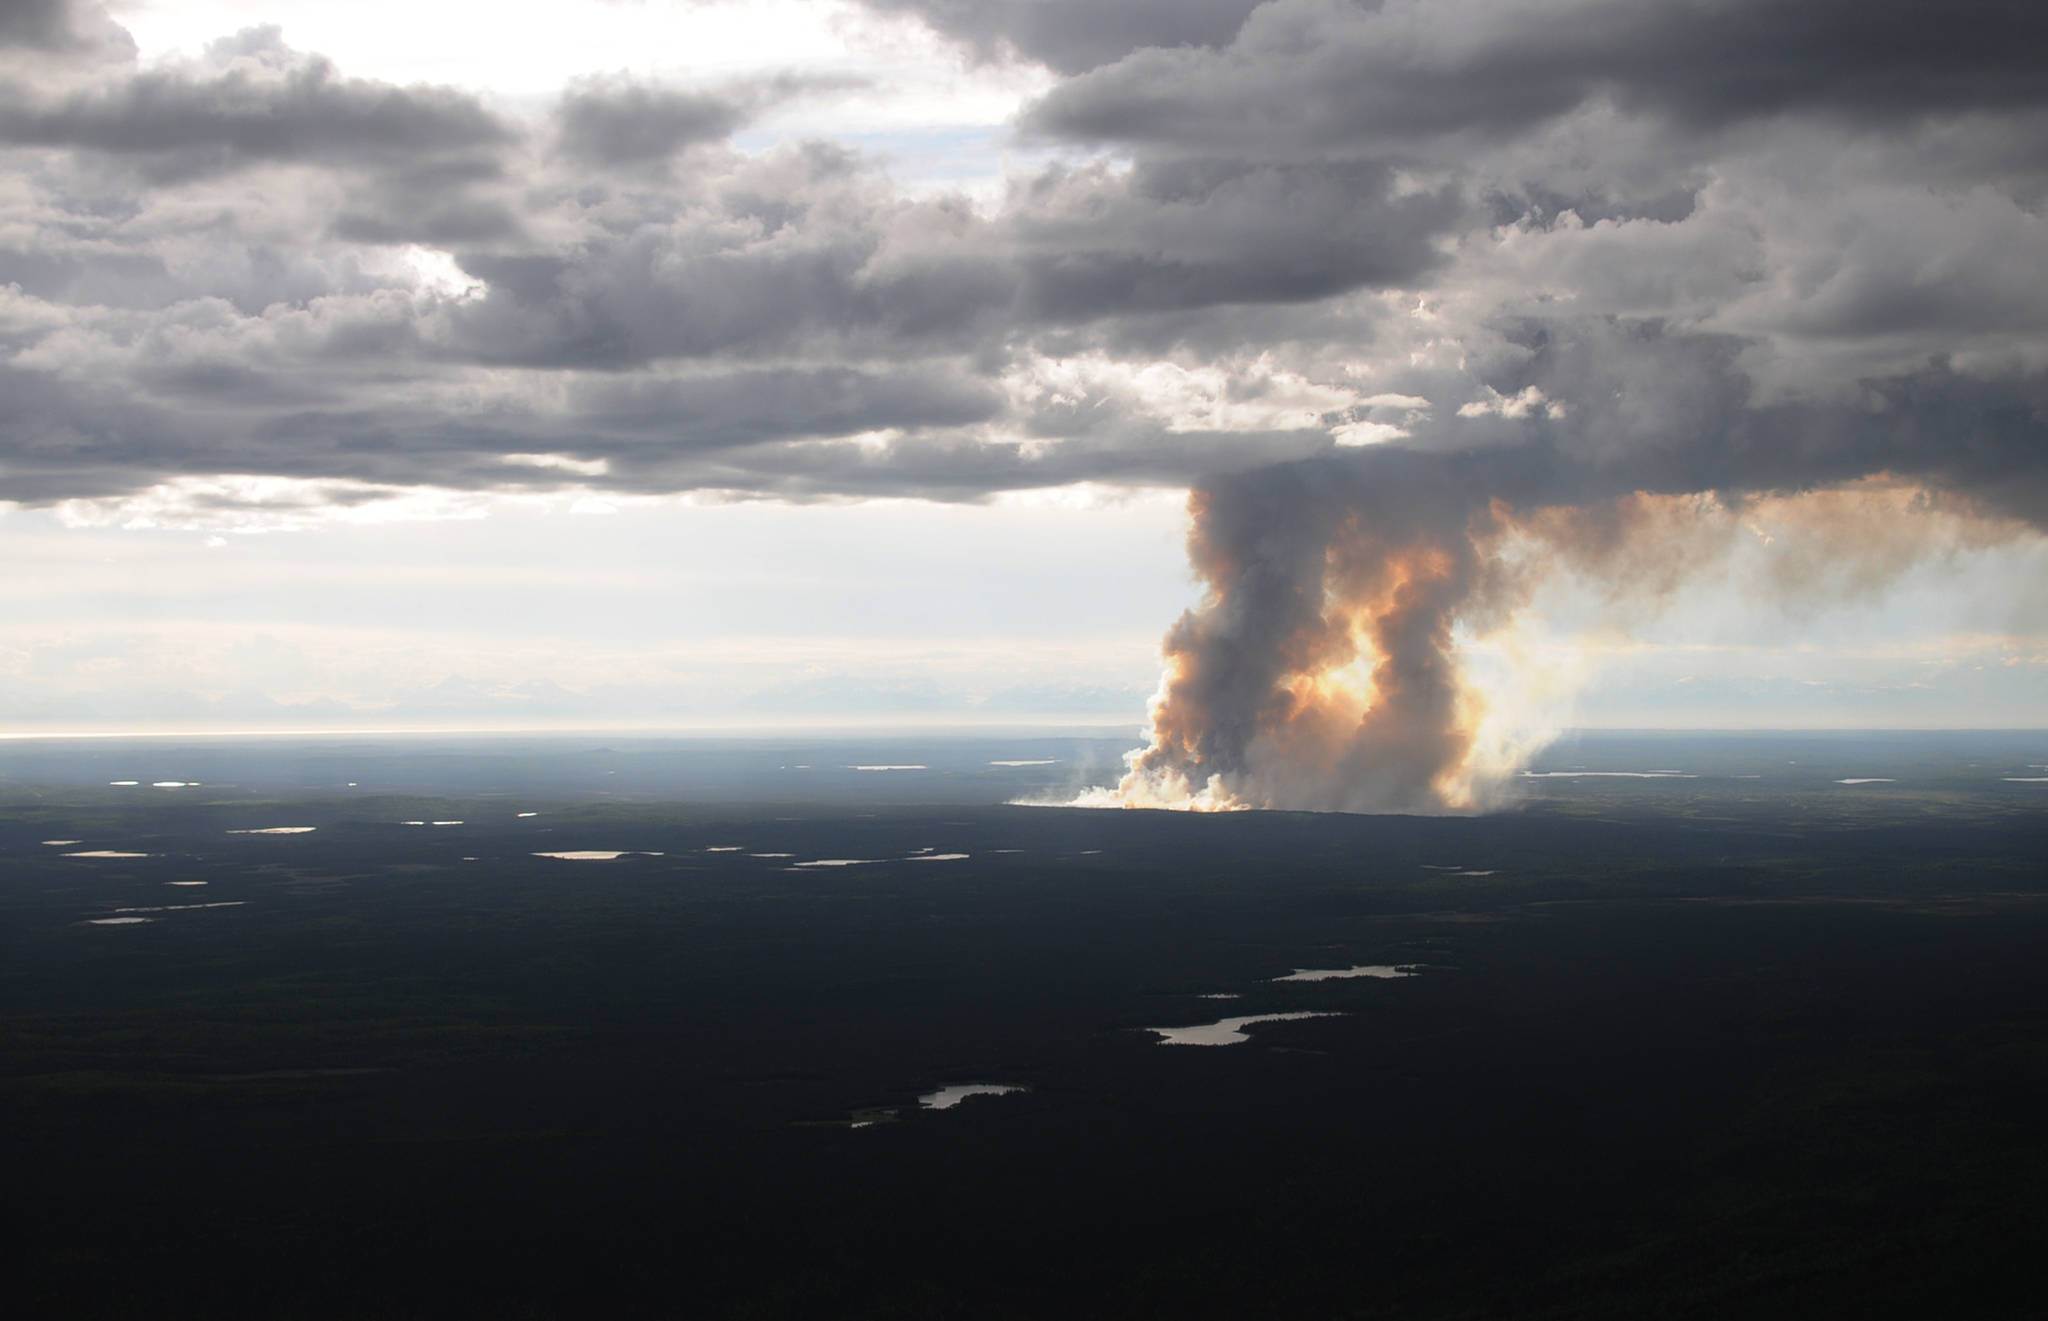 Smoke rises from the burn area of the East Fork Fire on the Kenai National Wildlife Refuge on Friday, June 16, 2017 near Sterling, Alaska. The fire, sparked by dry lightning, had burned about 850 acres by Friday night. (Photo by Elizabeth Earl/Peninsula Clarion, file)